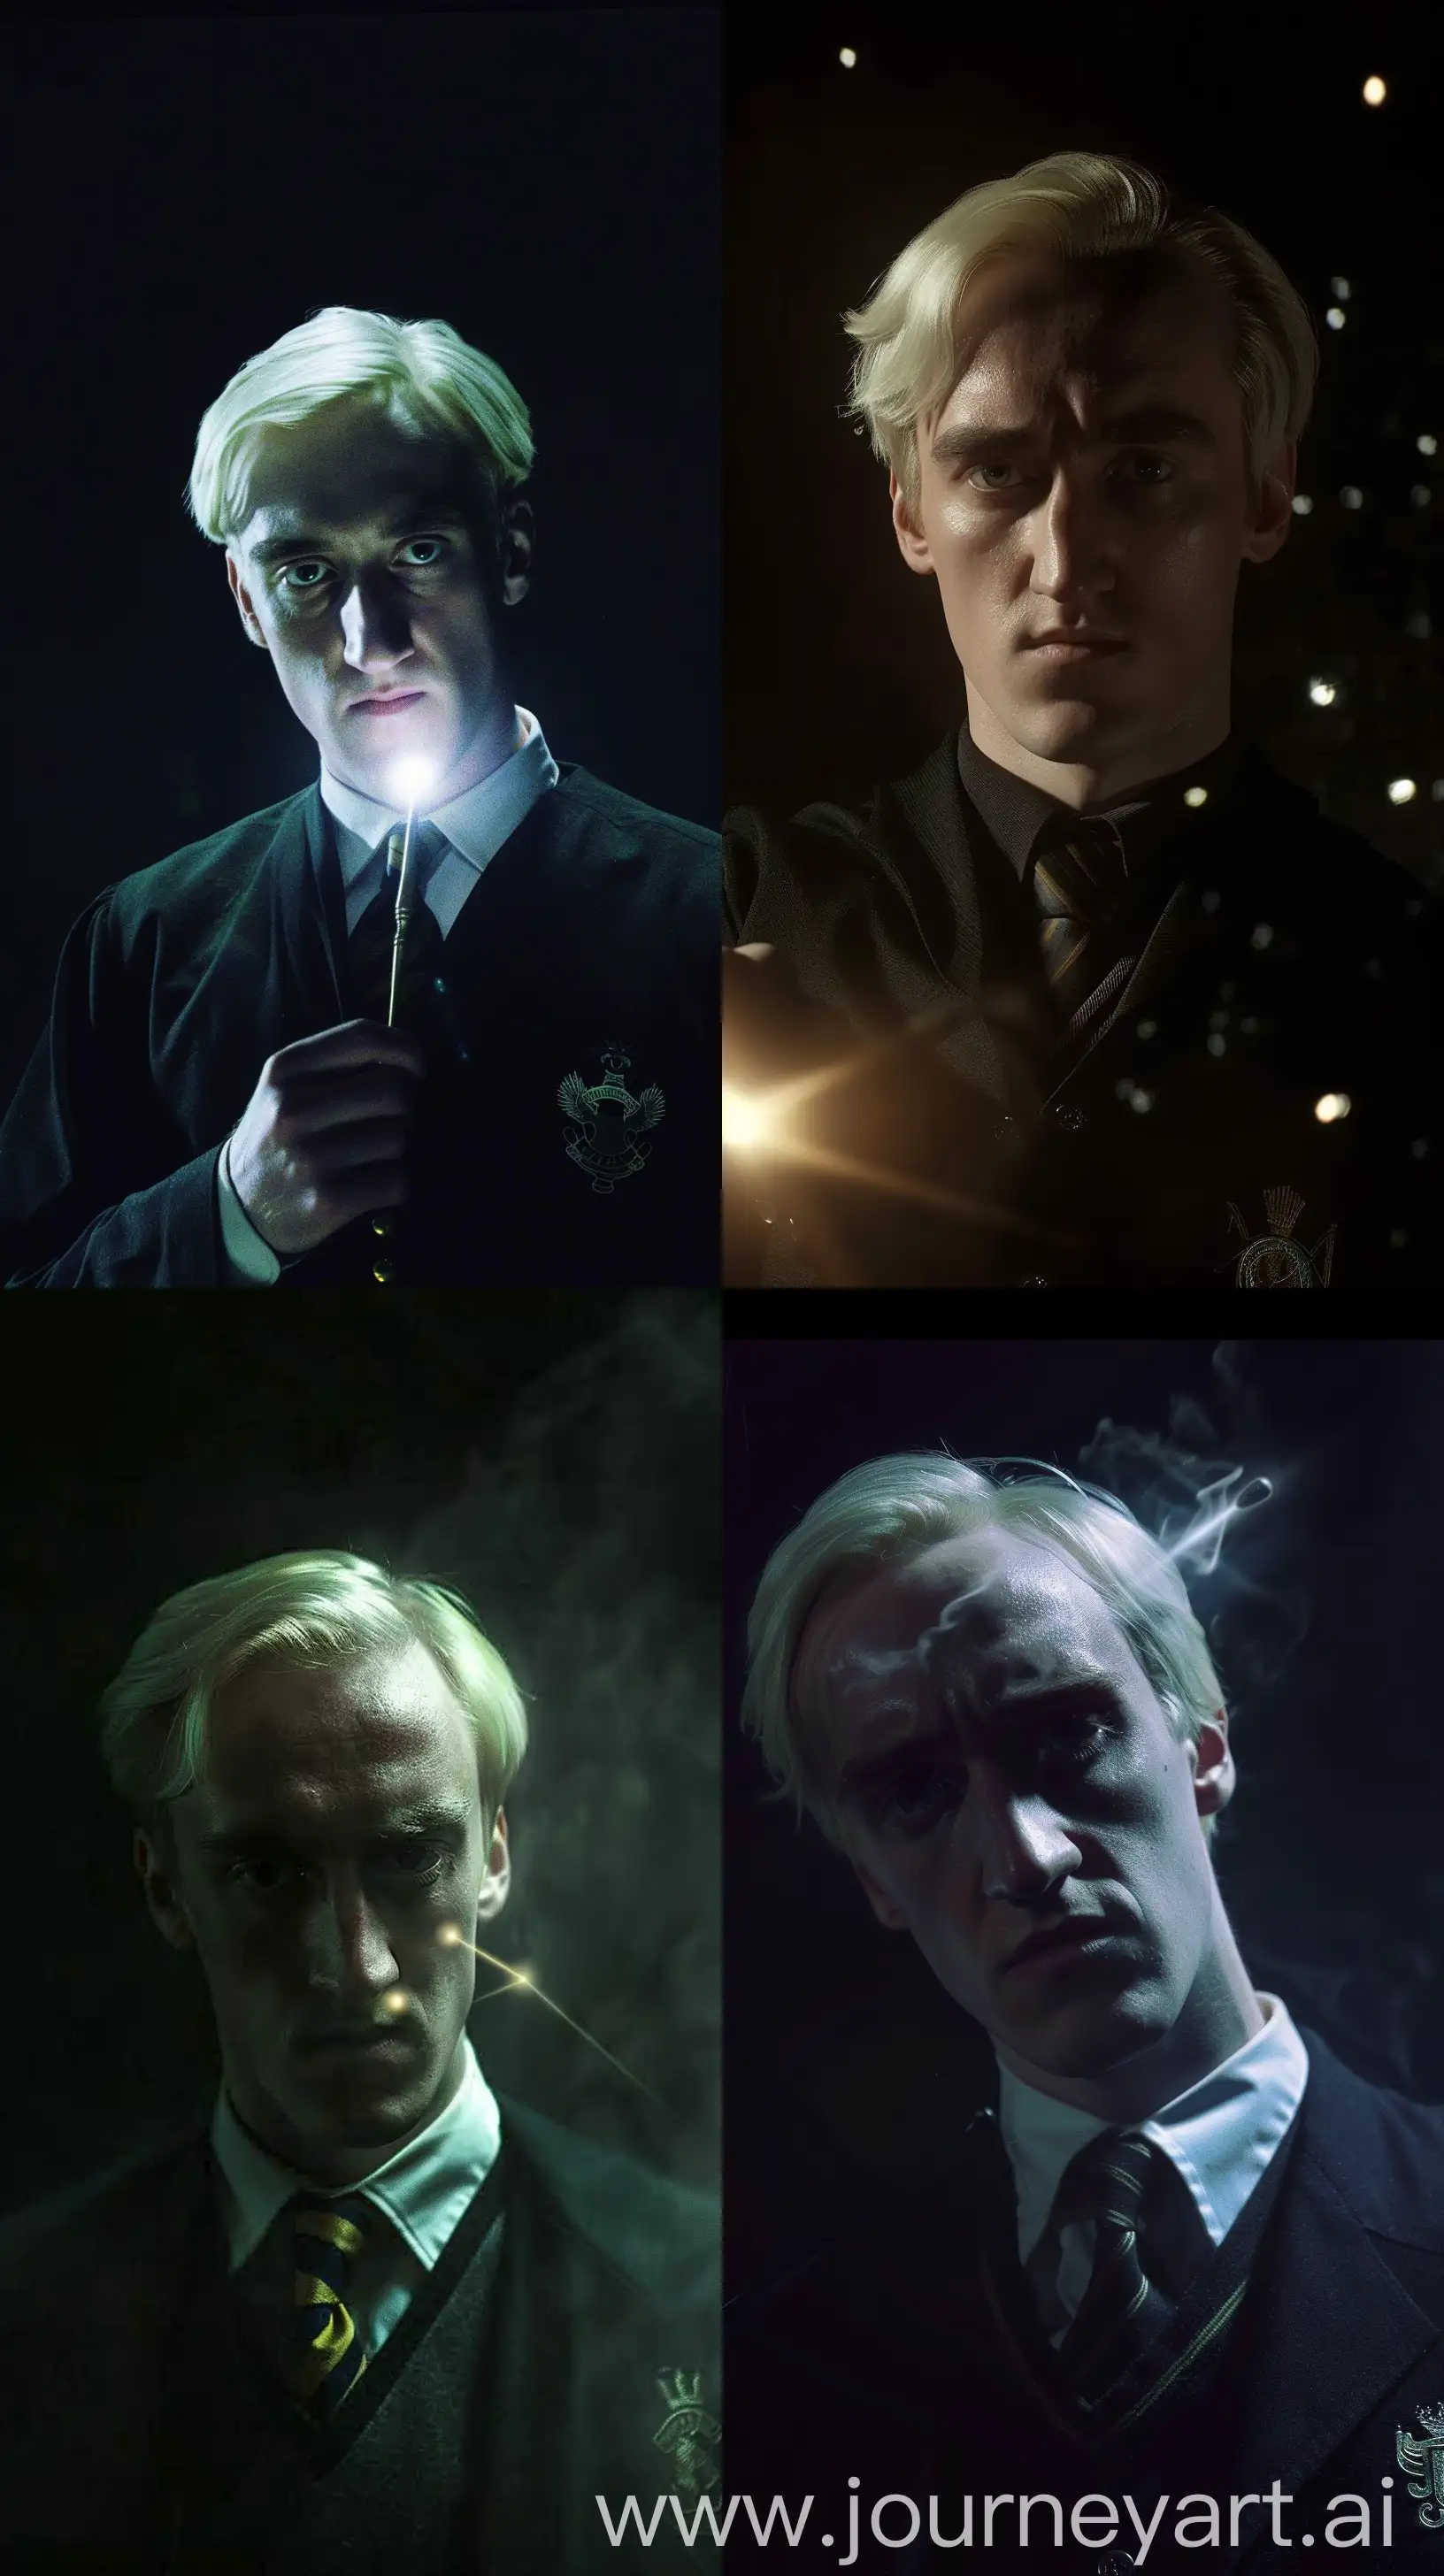 Draco-Malfoy-Casting-Spell-in-Slytherin-Uniform-Against-Darkness